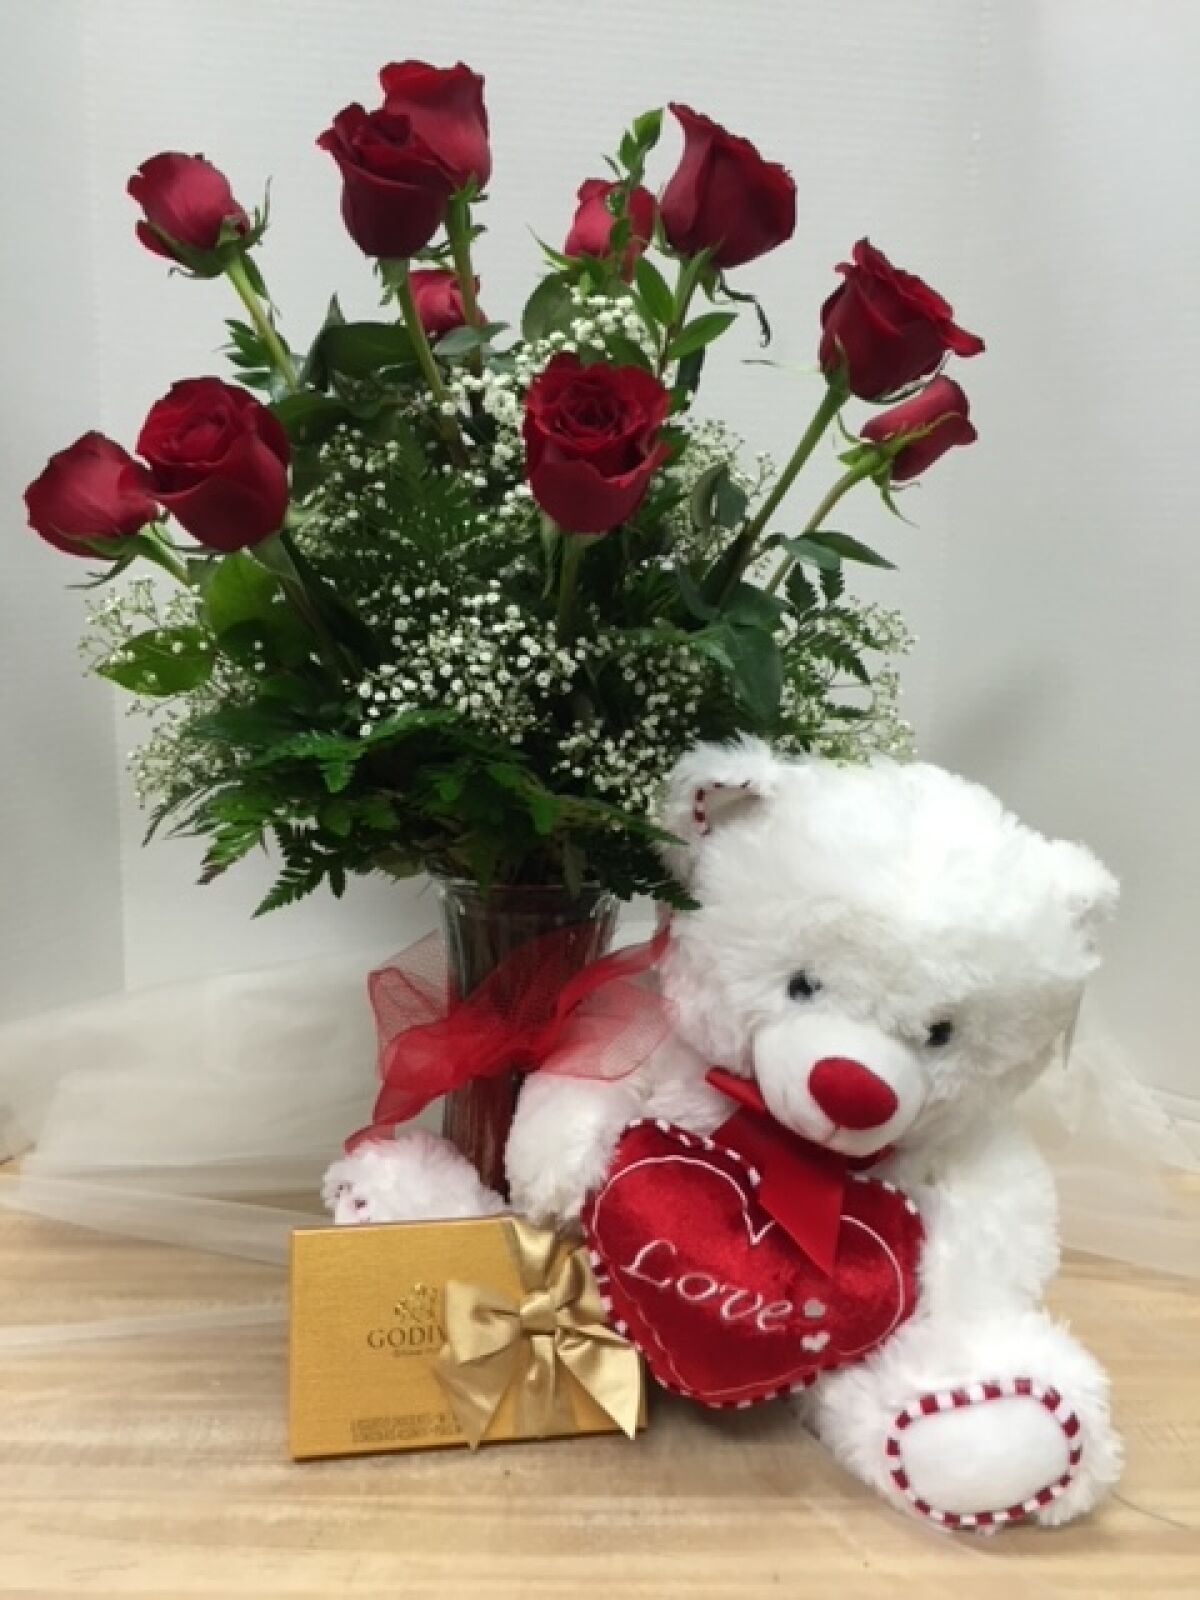 Red roses, chocolates and a teddy bear holding a heart are among the items Crystal Gardens Florist will be delivering.  